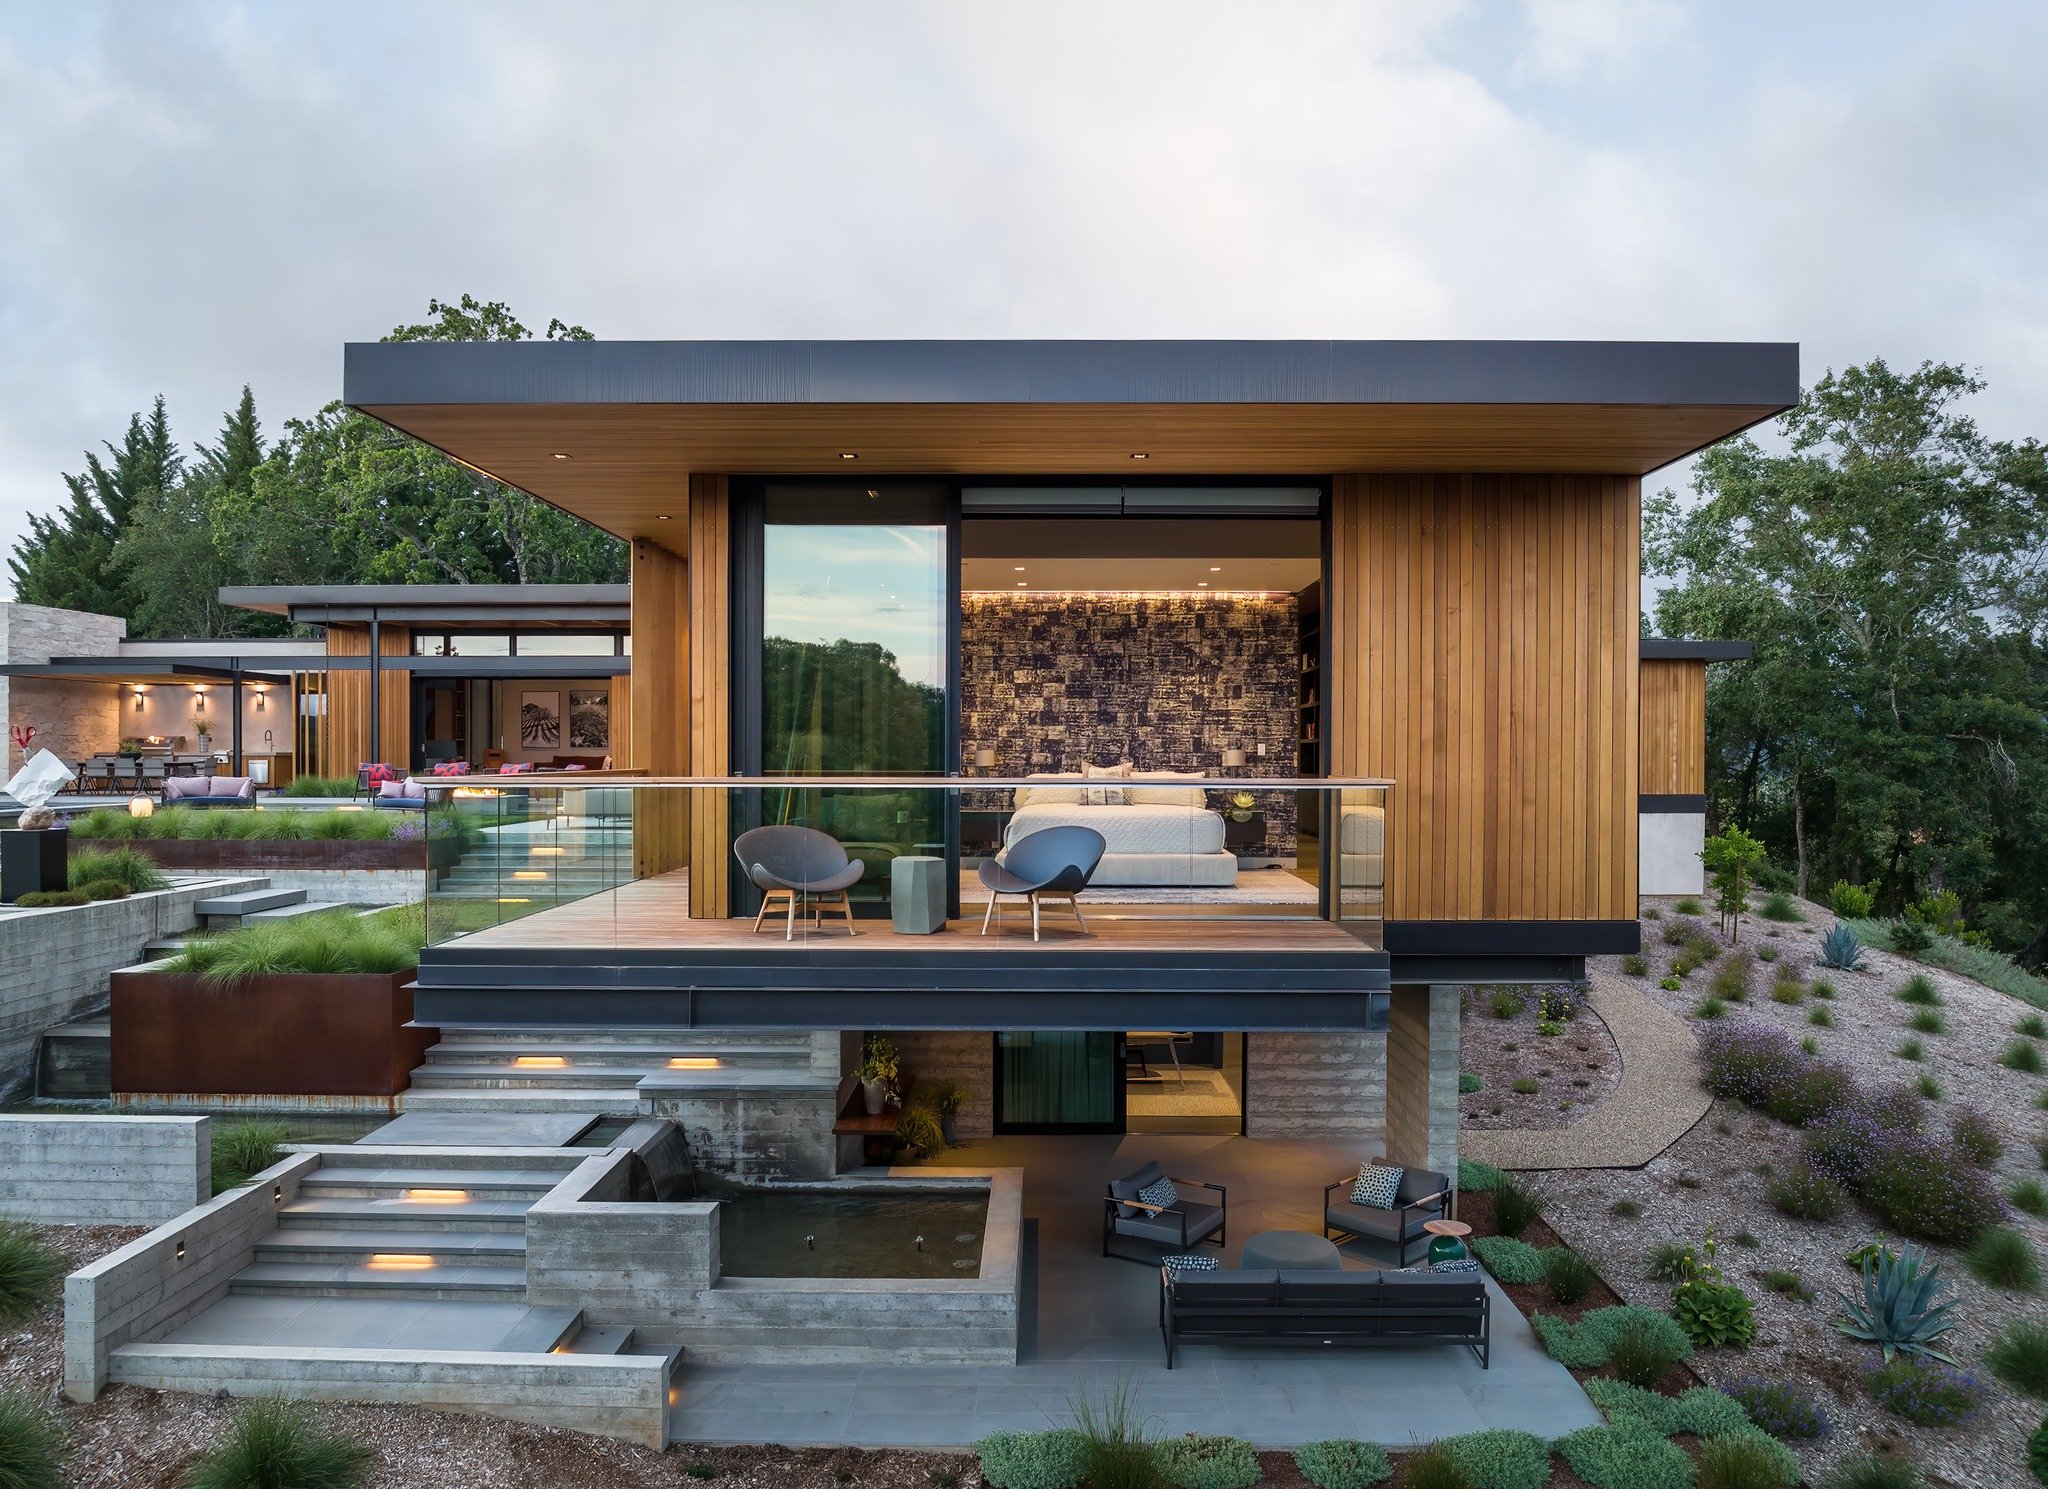 These wonderful angles shot by interiors photographer @adampottsphoto showcases the Rock, Paper, Scissors (RPS) project in #healdsburg  perfectly. The primary suite cantilevers out over the hillside, creating both privacy and views. 
Architect @zimme